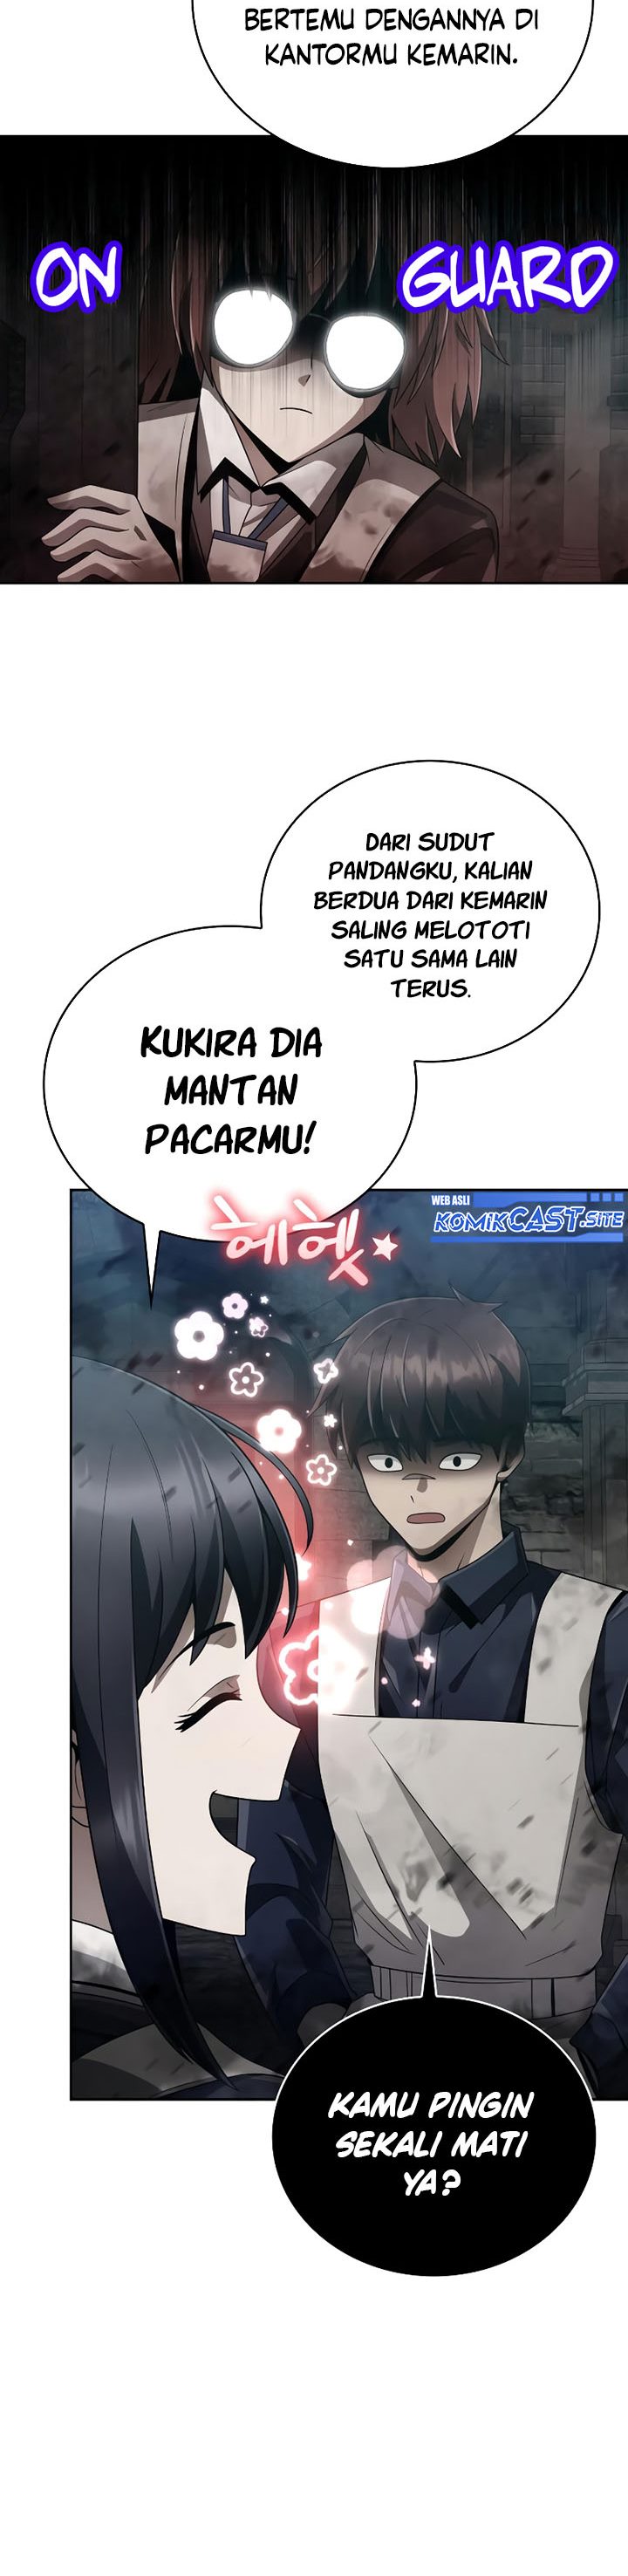 Dilarang COPAS - situs resmi www.mangacanblog.com - Komik clever cleaning life of the returned genius hunter 019 - chapter 19 20 Indonesia clever cleaning life of the returned genius hunter 019 - chapter 19 Terbaru 15|Baca Manga Komik Indonesia|Mangacan